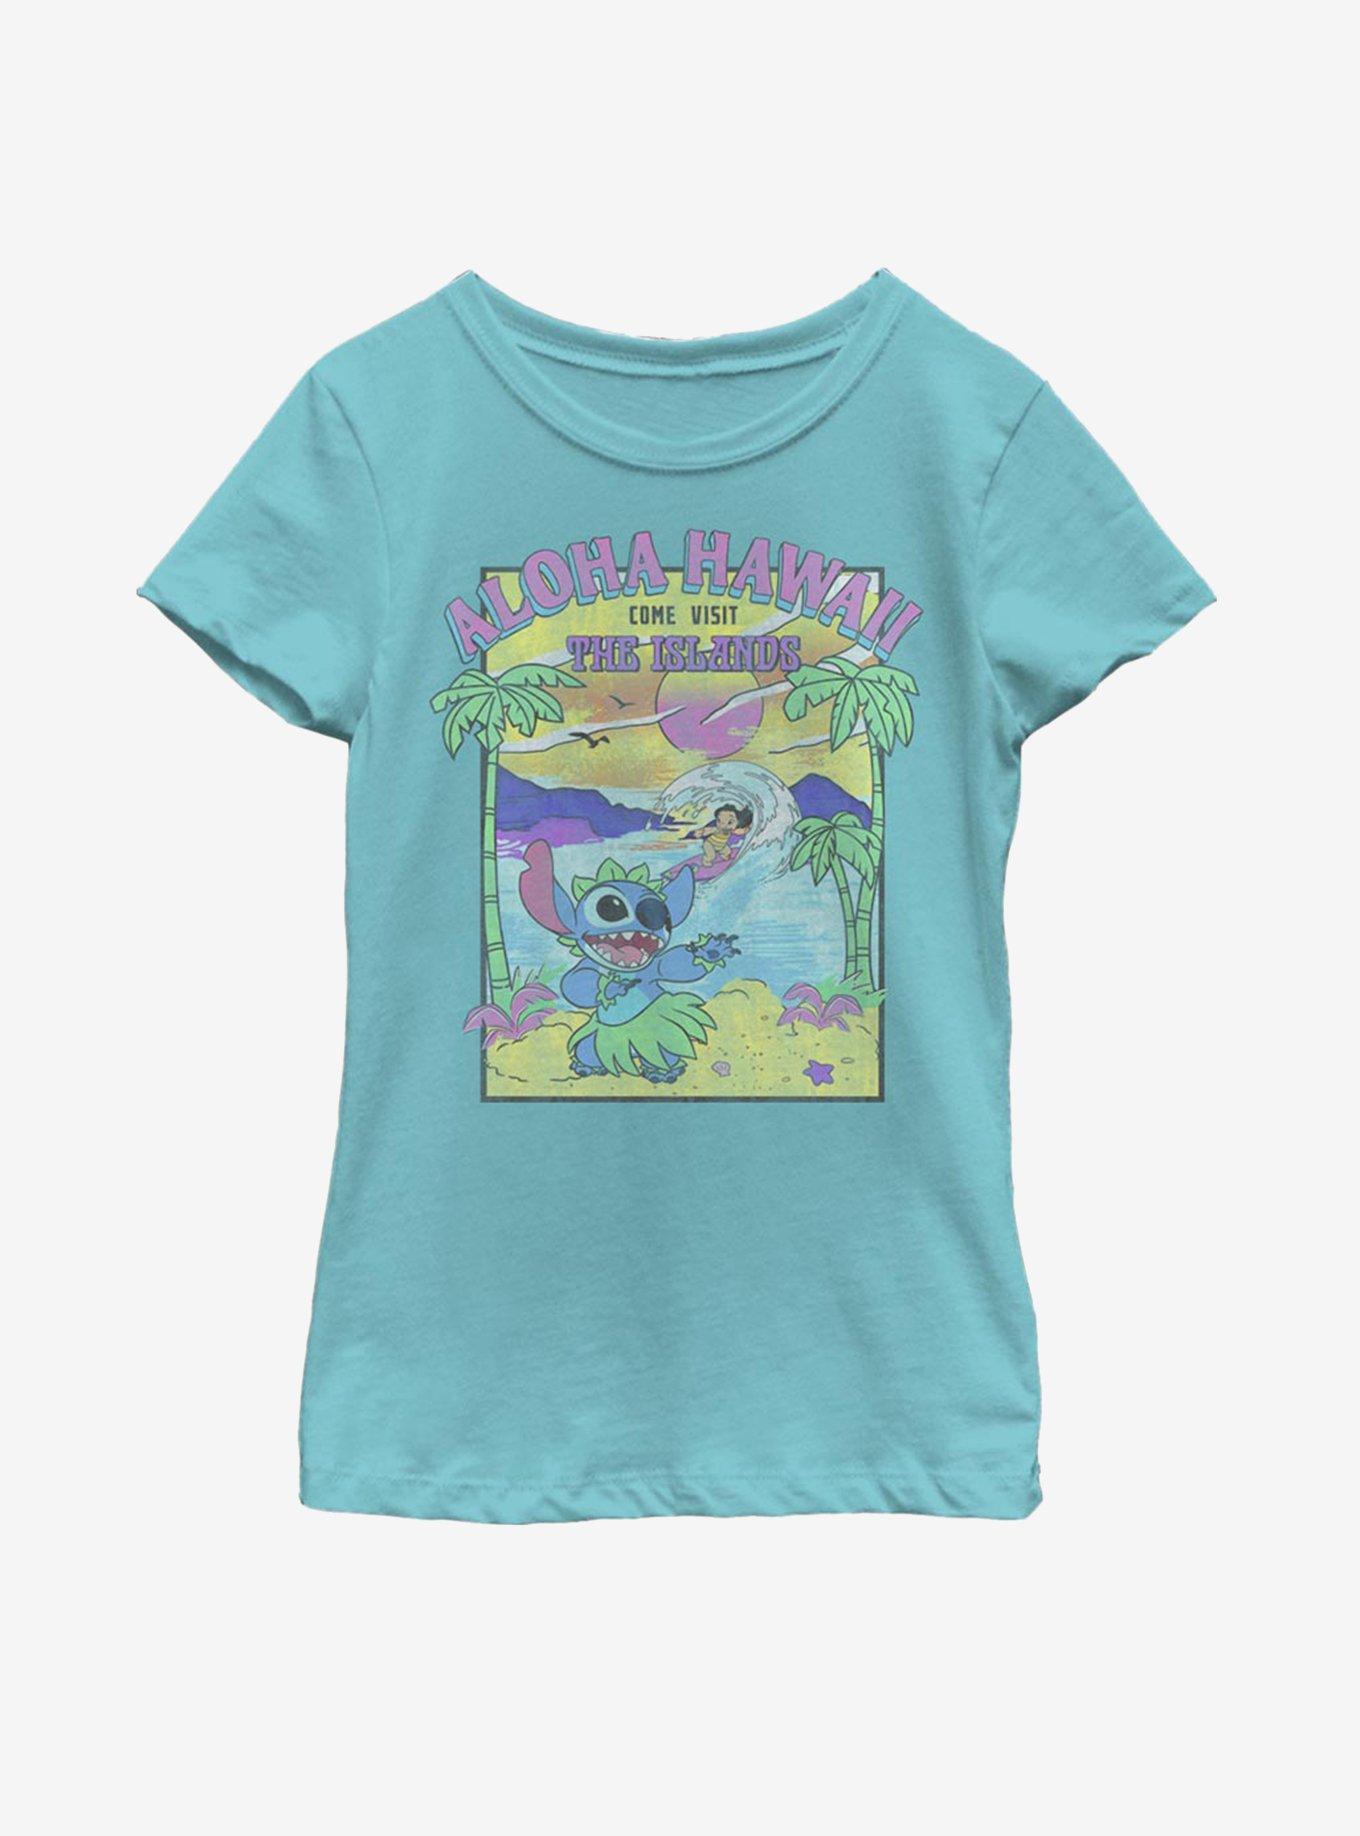 Disney Lilo And Stitch Visit The Islands Youth Girls T-Shirt - BLUE ...